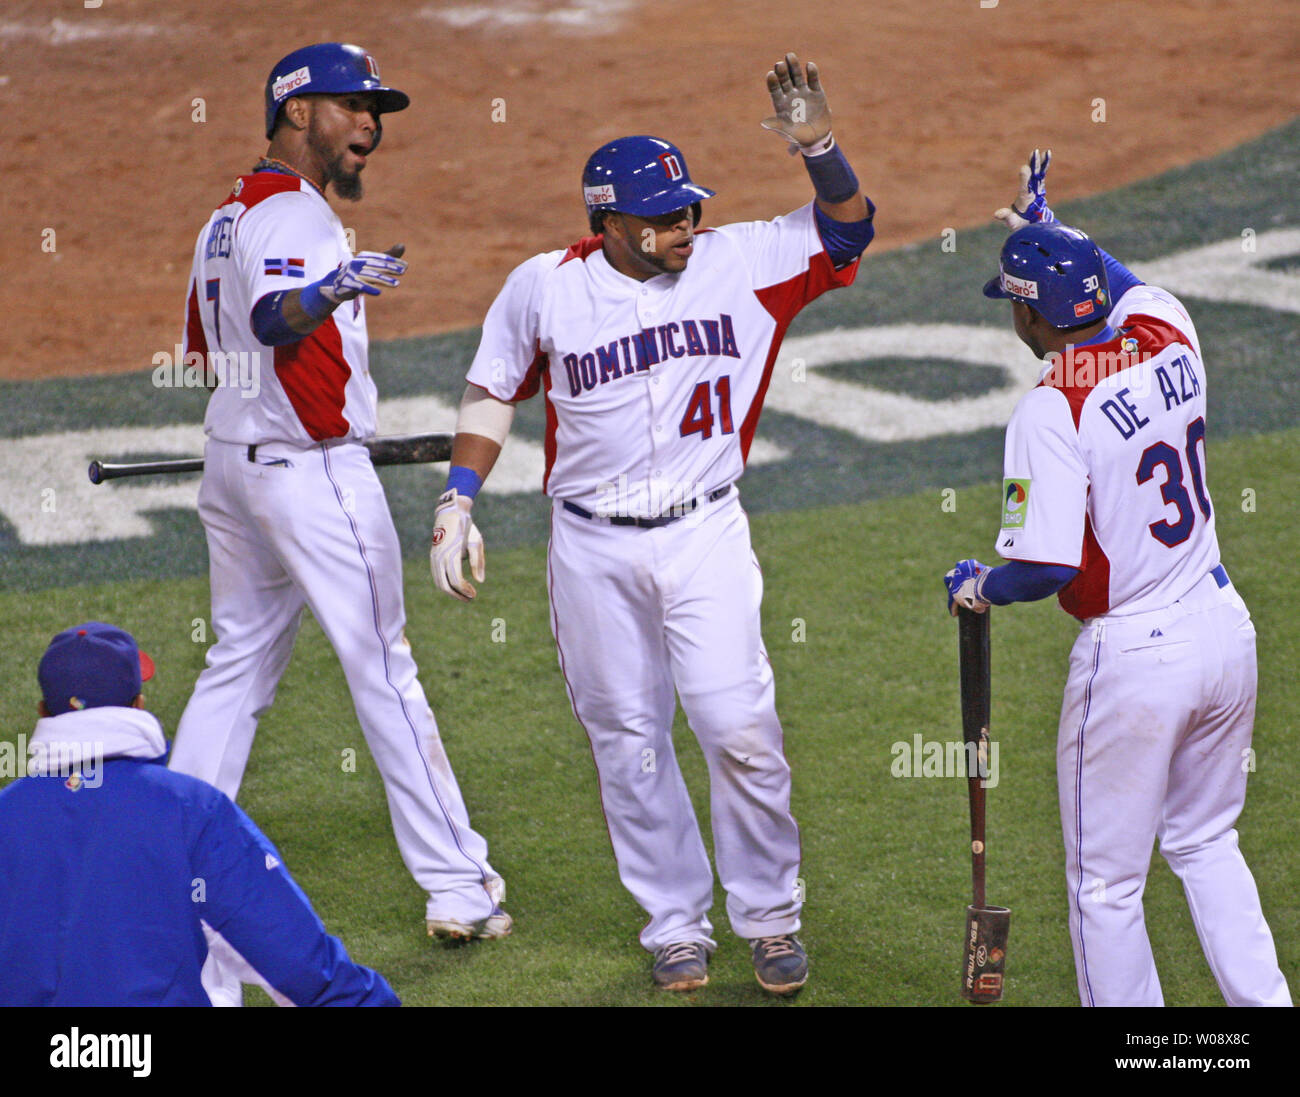 Dominican Republic's Carlos Santana (41) is congratulated at the dugout after scoring against Netherlands in the fifth inning of the semi finals of the World Baseball Classic at AT&T Park in San Francisco on March 18, 2013. Dominican Republic defeated Netherlands 4-1.   UPI/Bruce Gordon Stock Photo